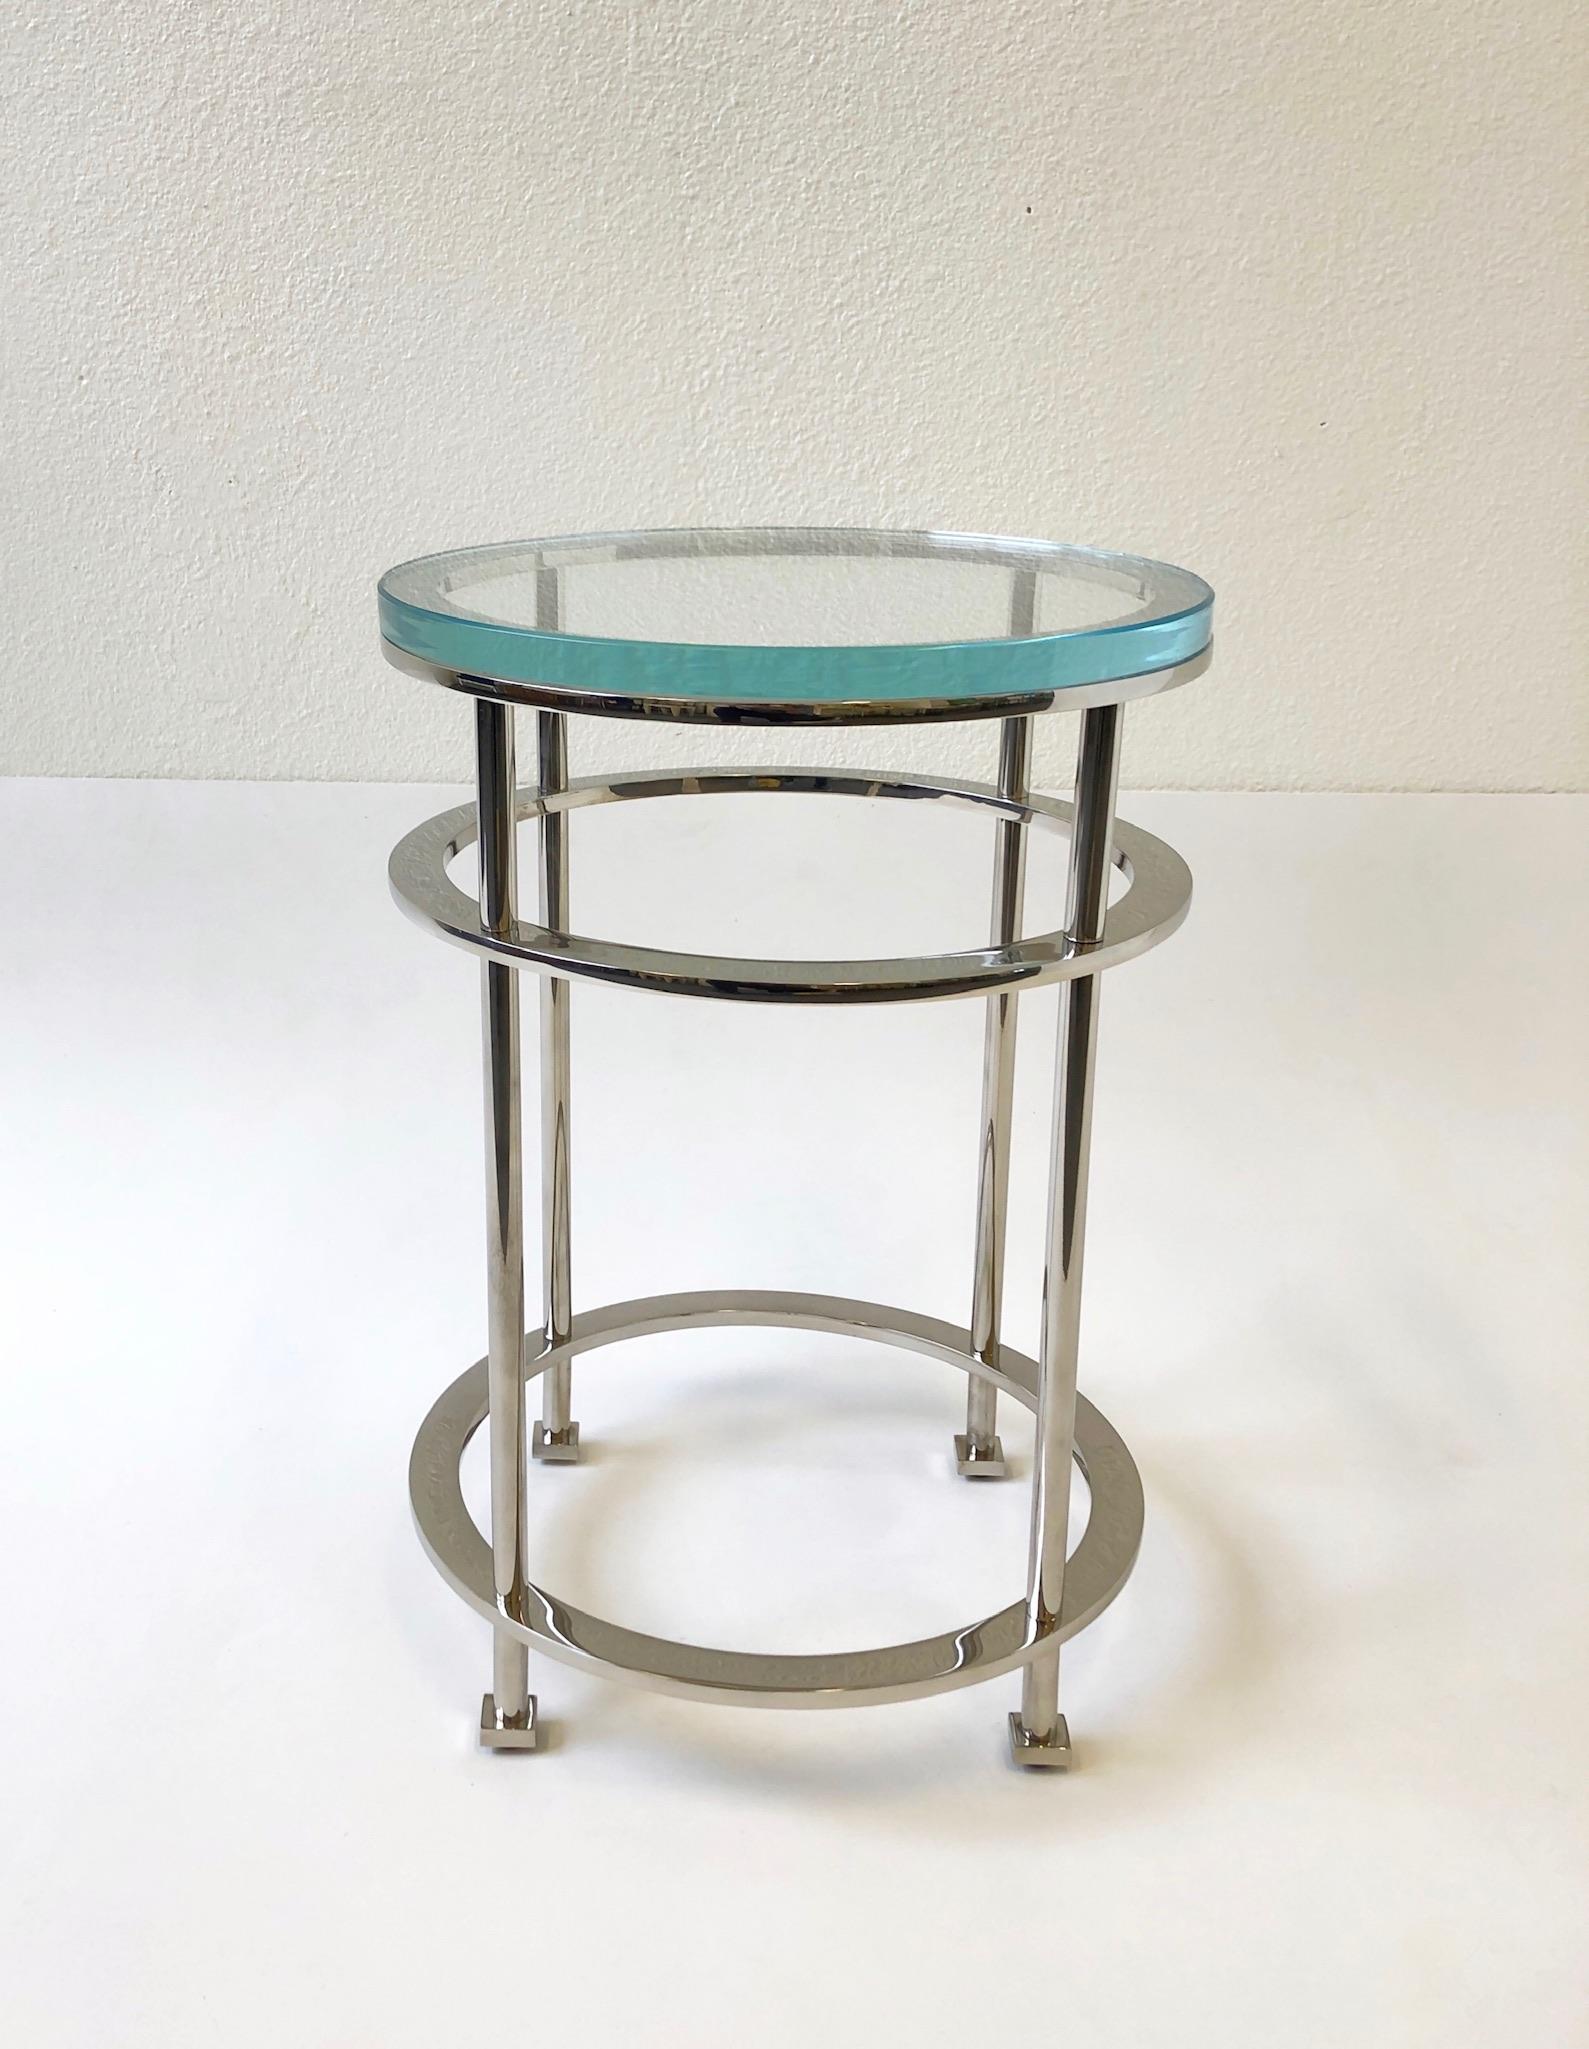 Pair of Nickel and Lucite Side Tables by Jean Michel Wilmotte for Mirak 2